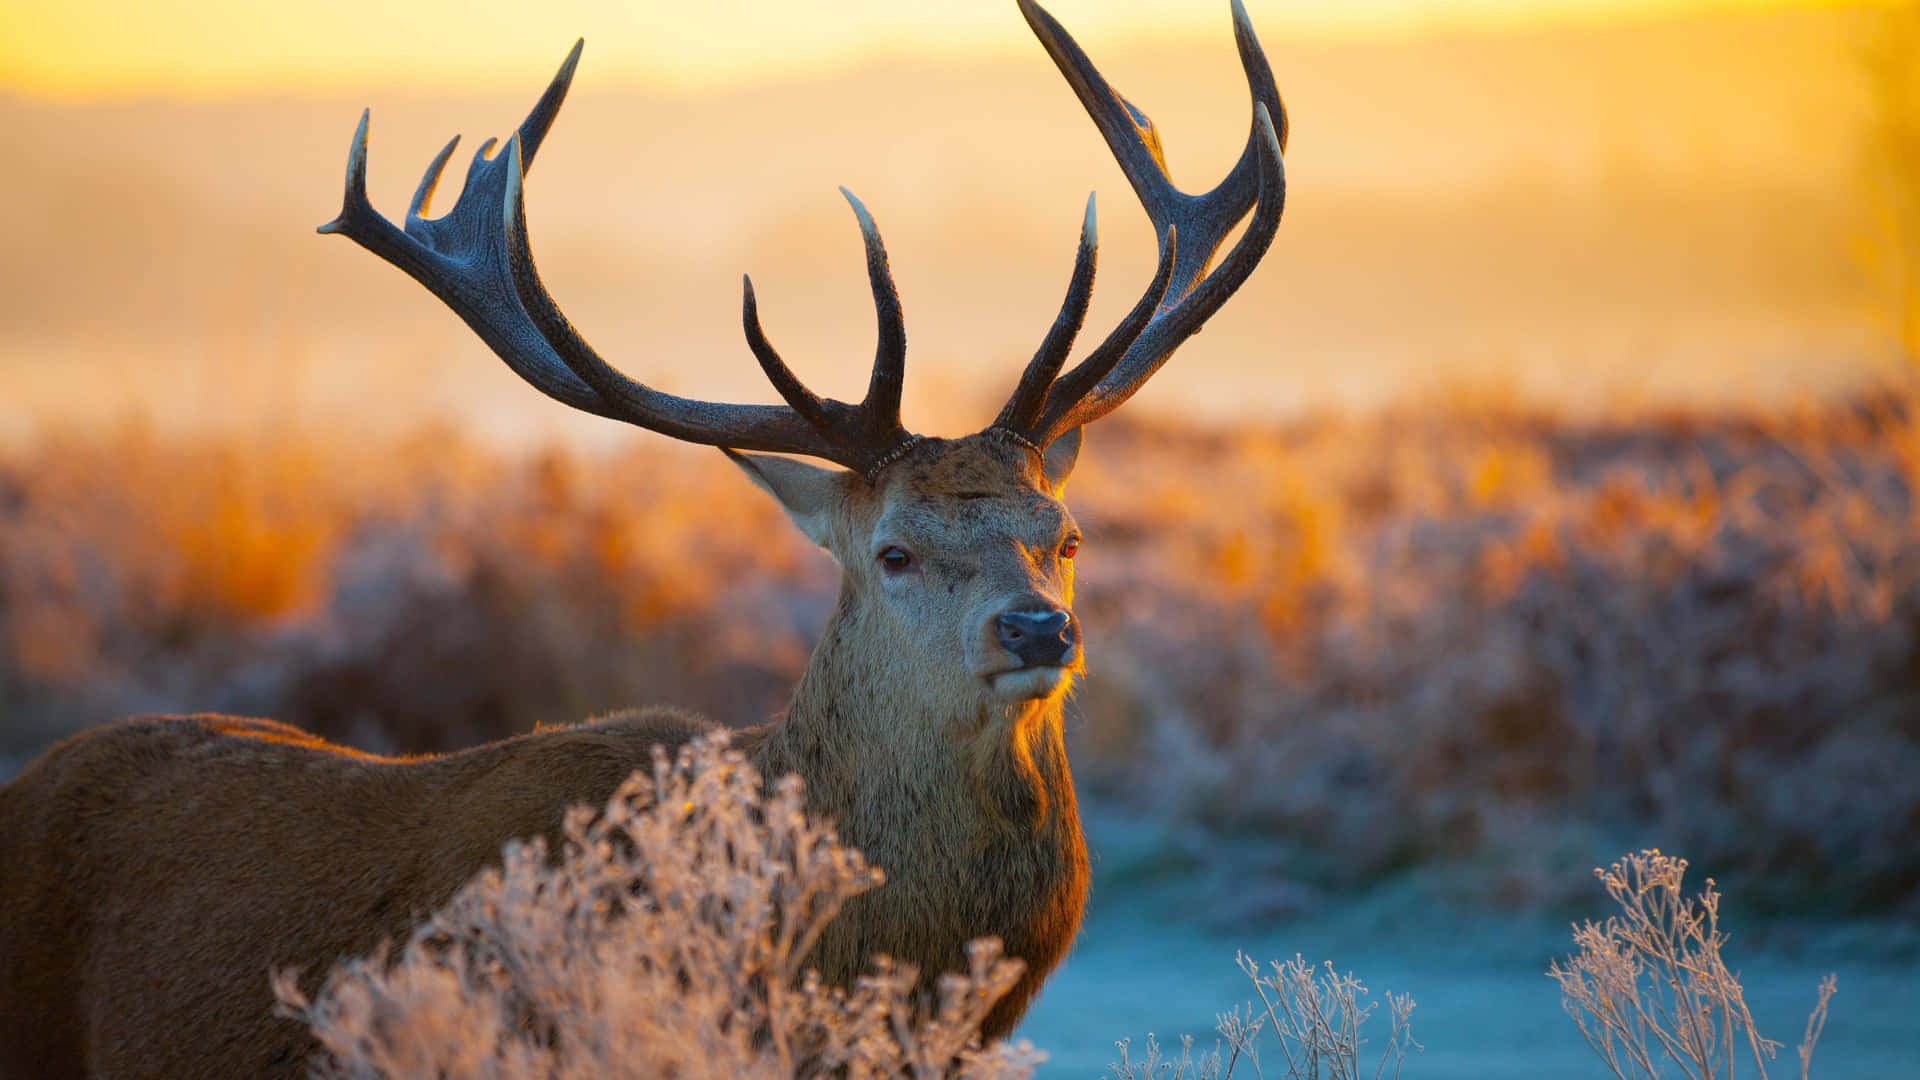 Majestic Roaming Stag In Wilderness Wallpaper